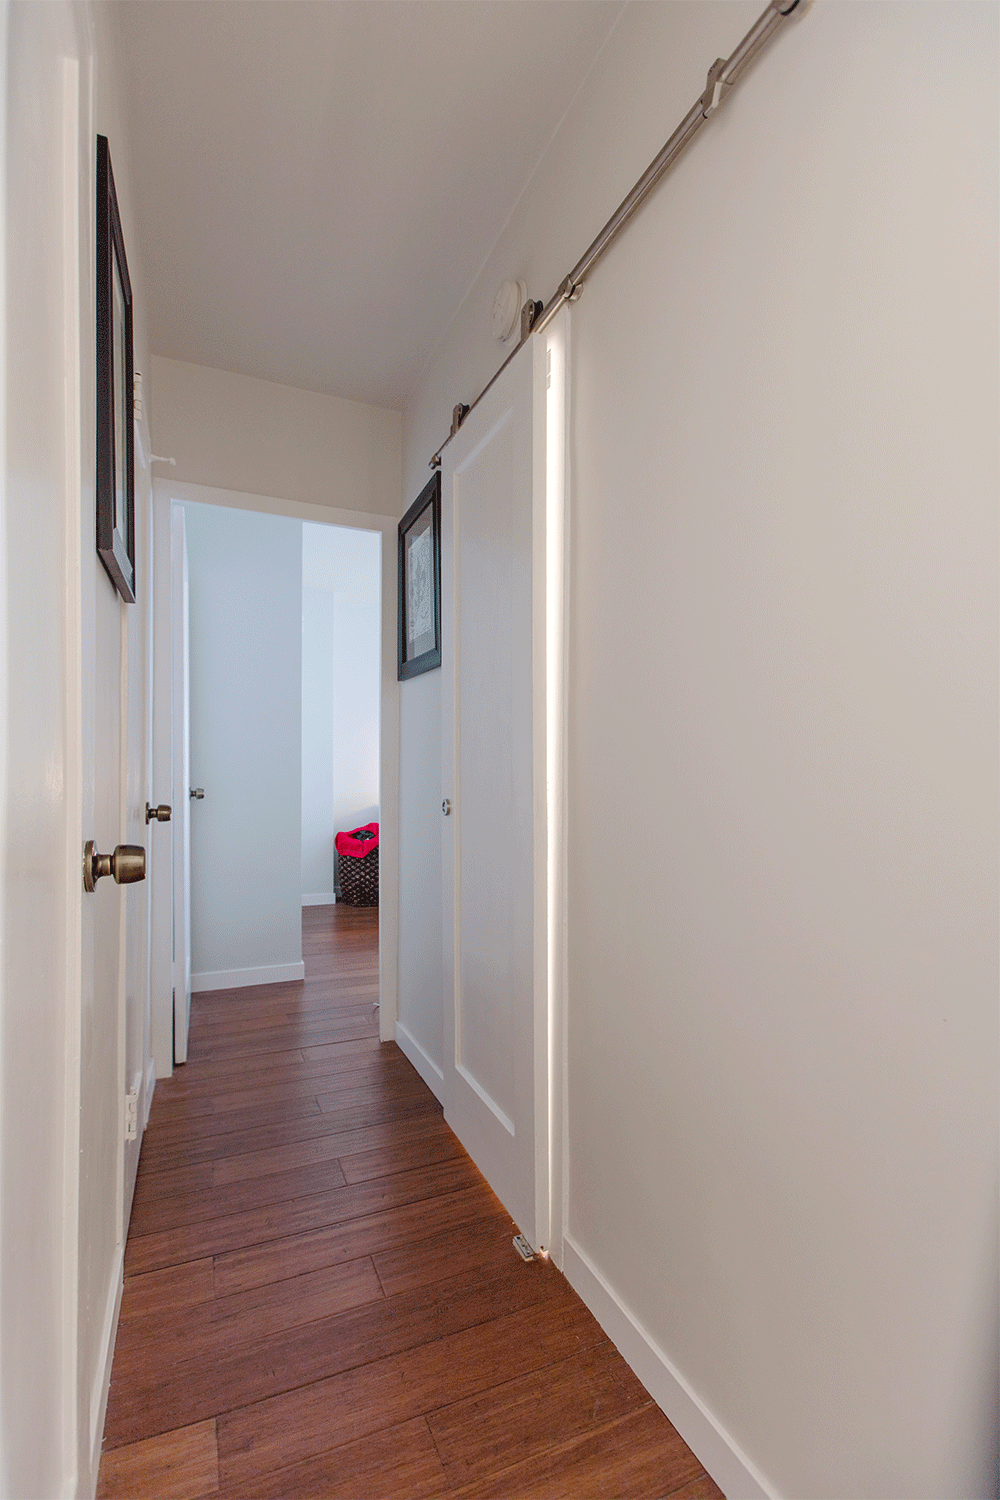 hallway with hardwood floors and white walls after renovation